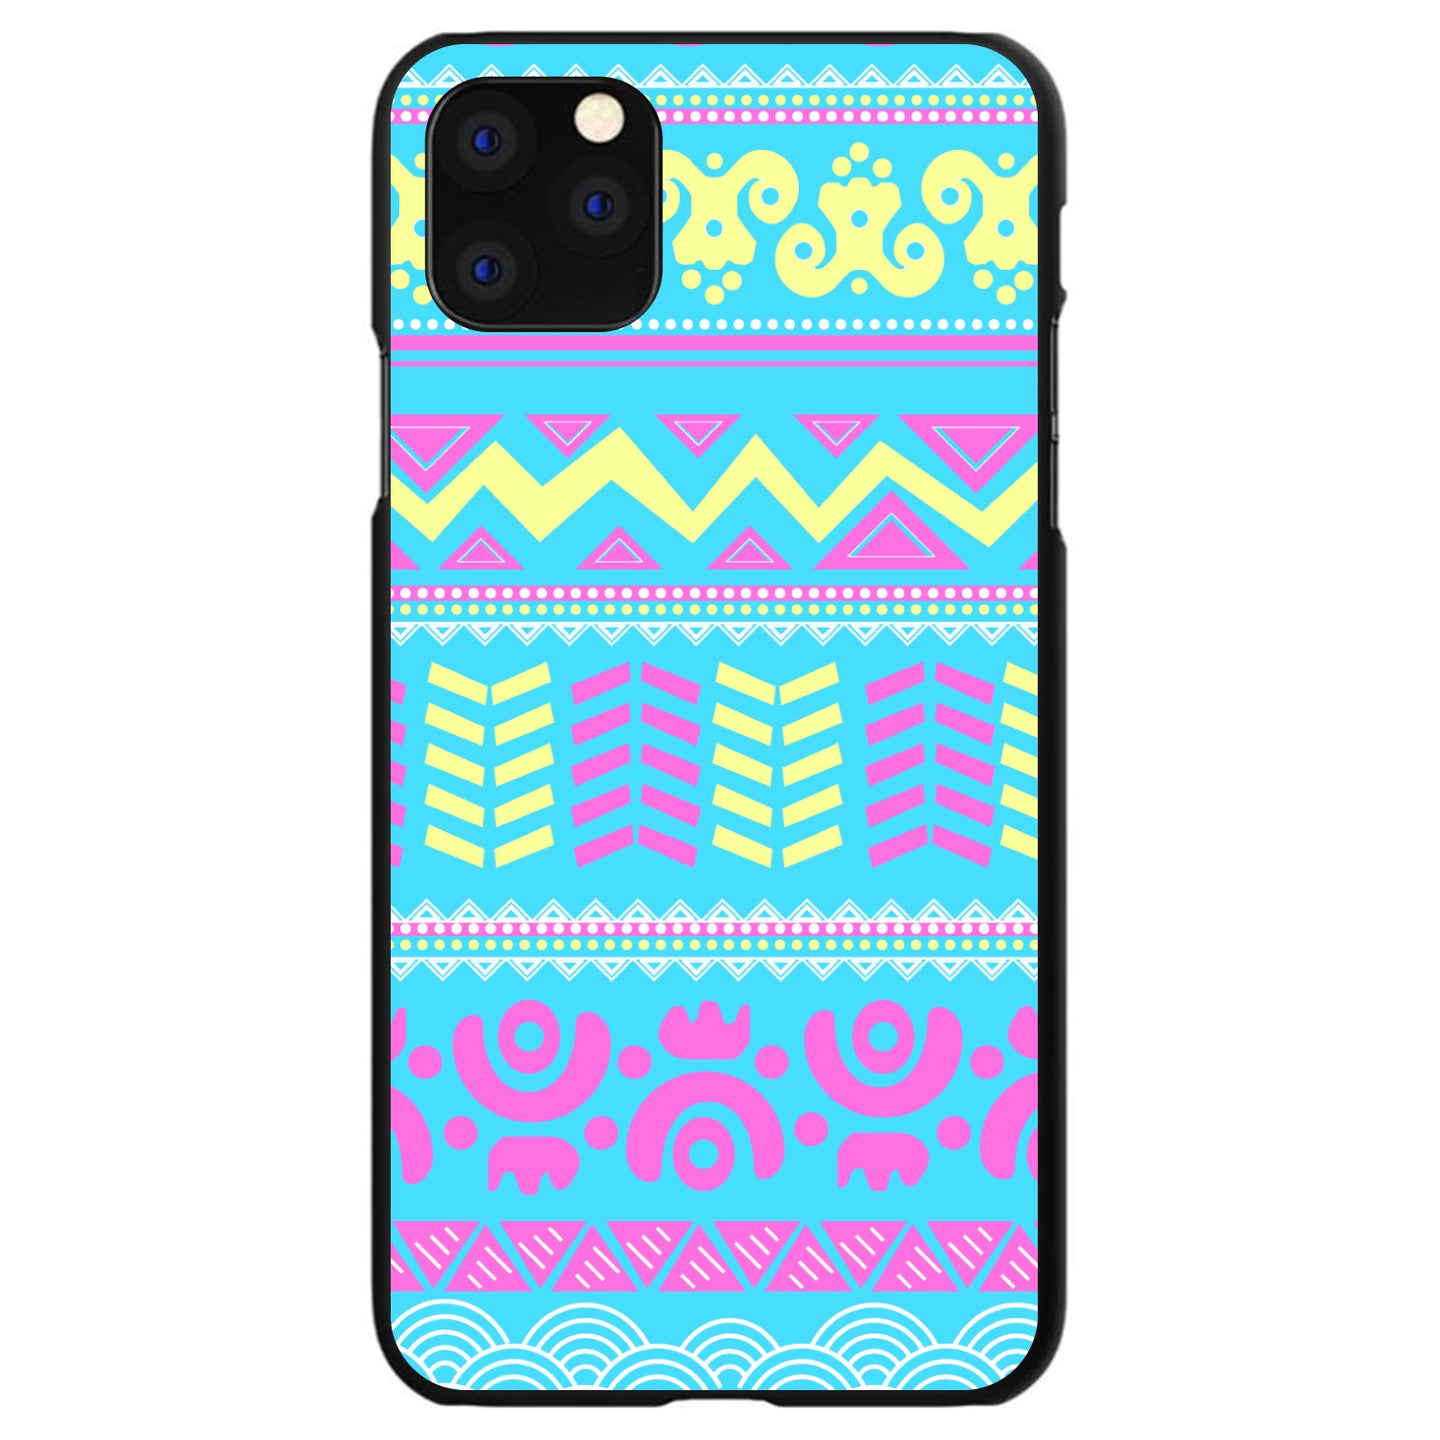 DistinctInk® Hard Plastic Snap-On Case for Apple iPhone or Samsung Galaxy - Yellow Pink Blue Aztec Tribal